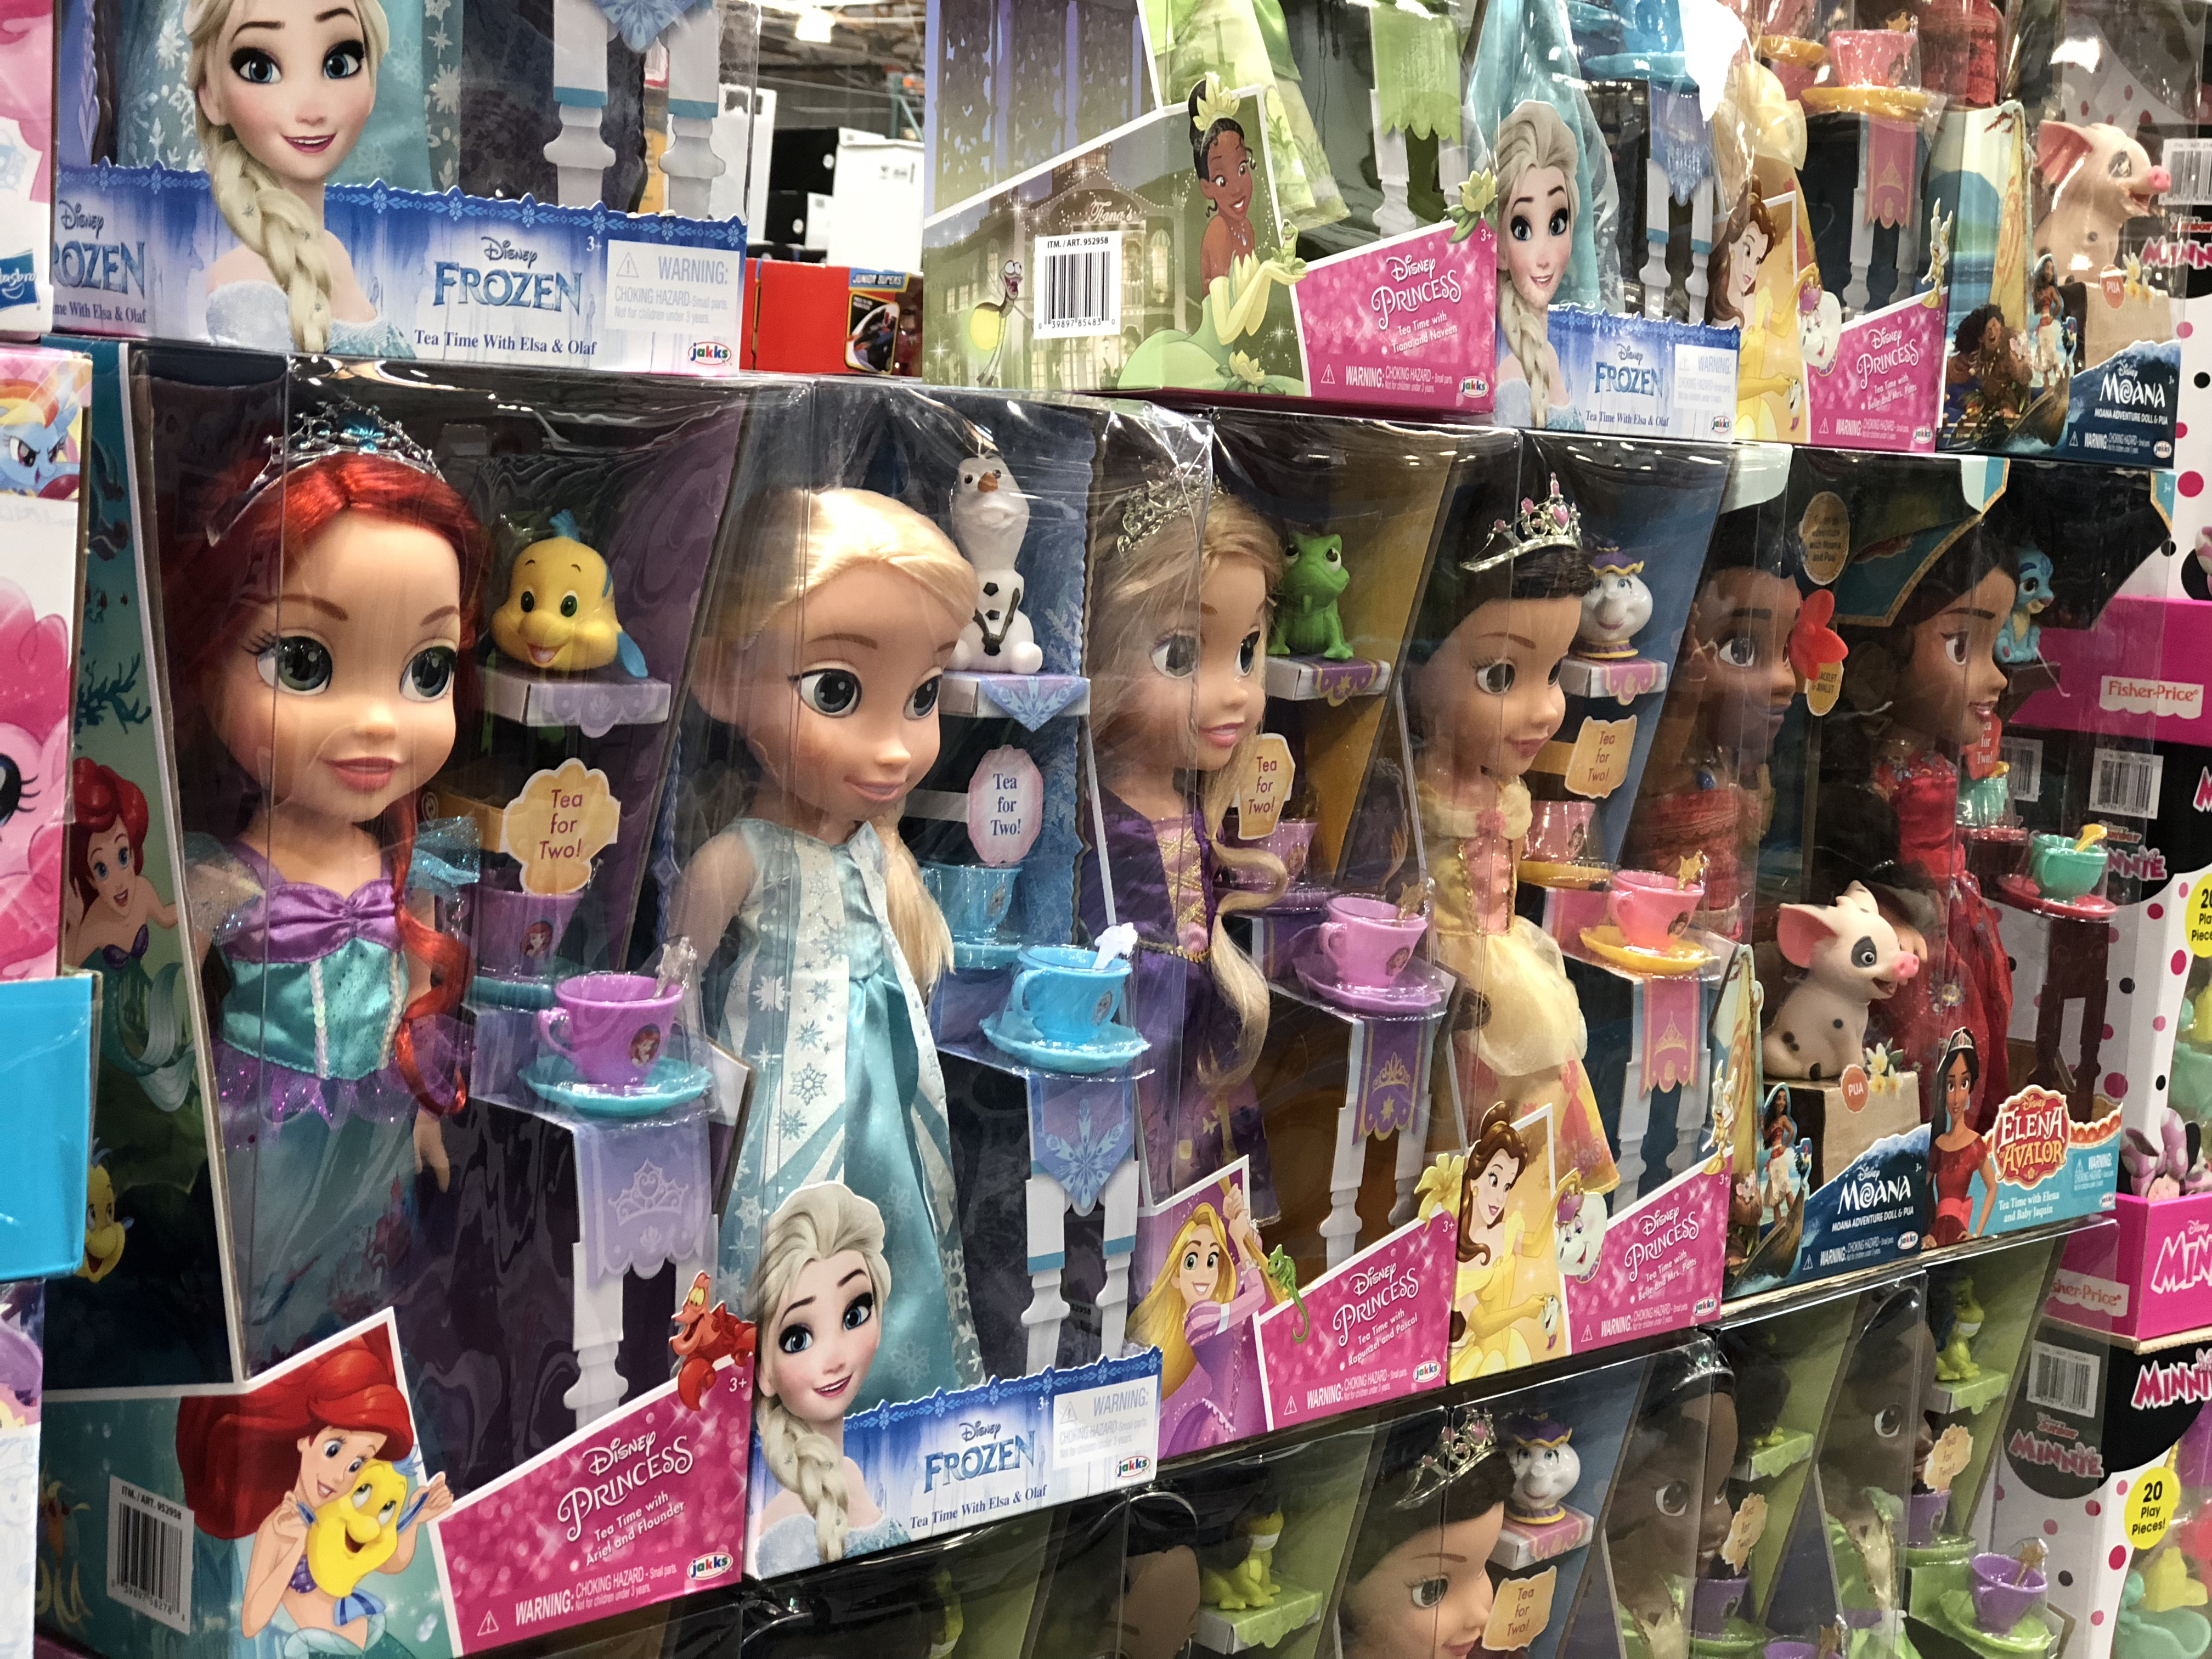 The best holiday toy deals for 2018 include Disney Princess Toddler Dolls at Costco